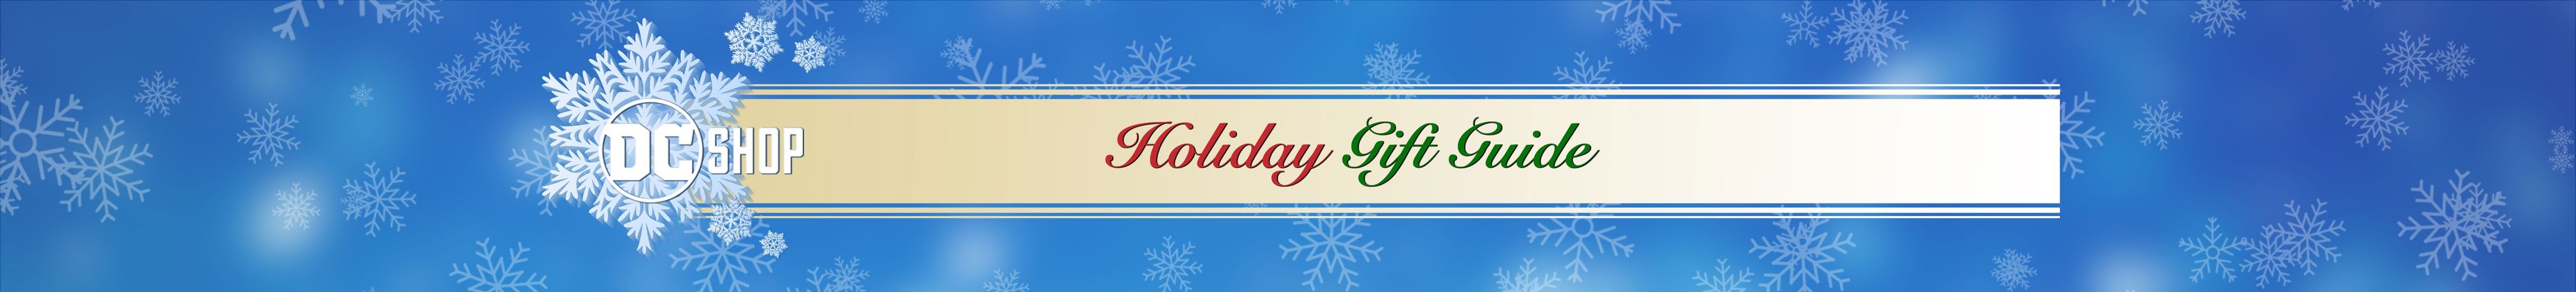 Holiday Gift Guide Banner